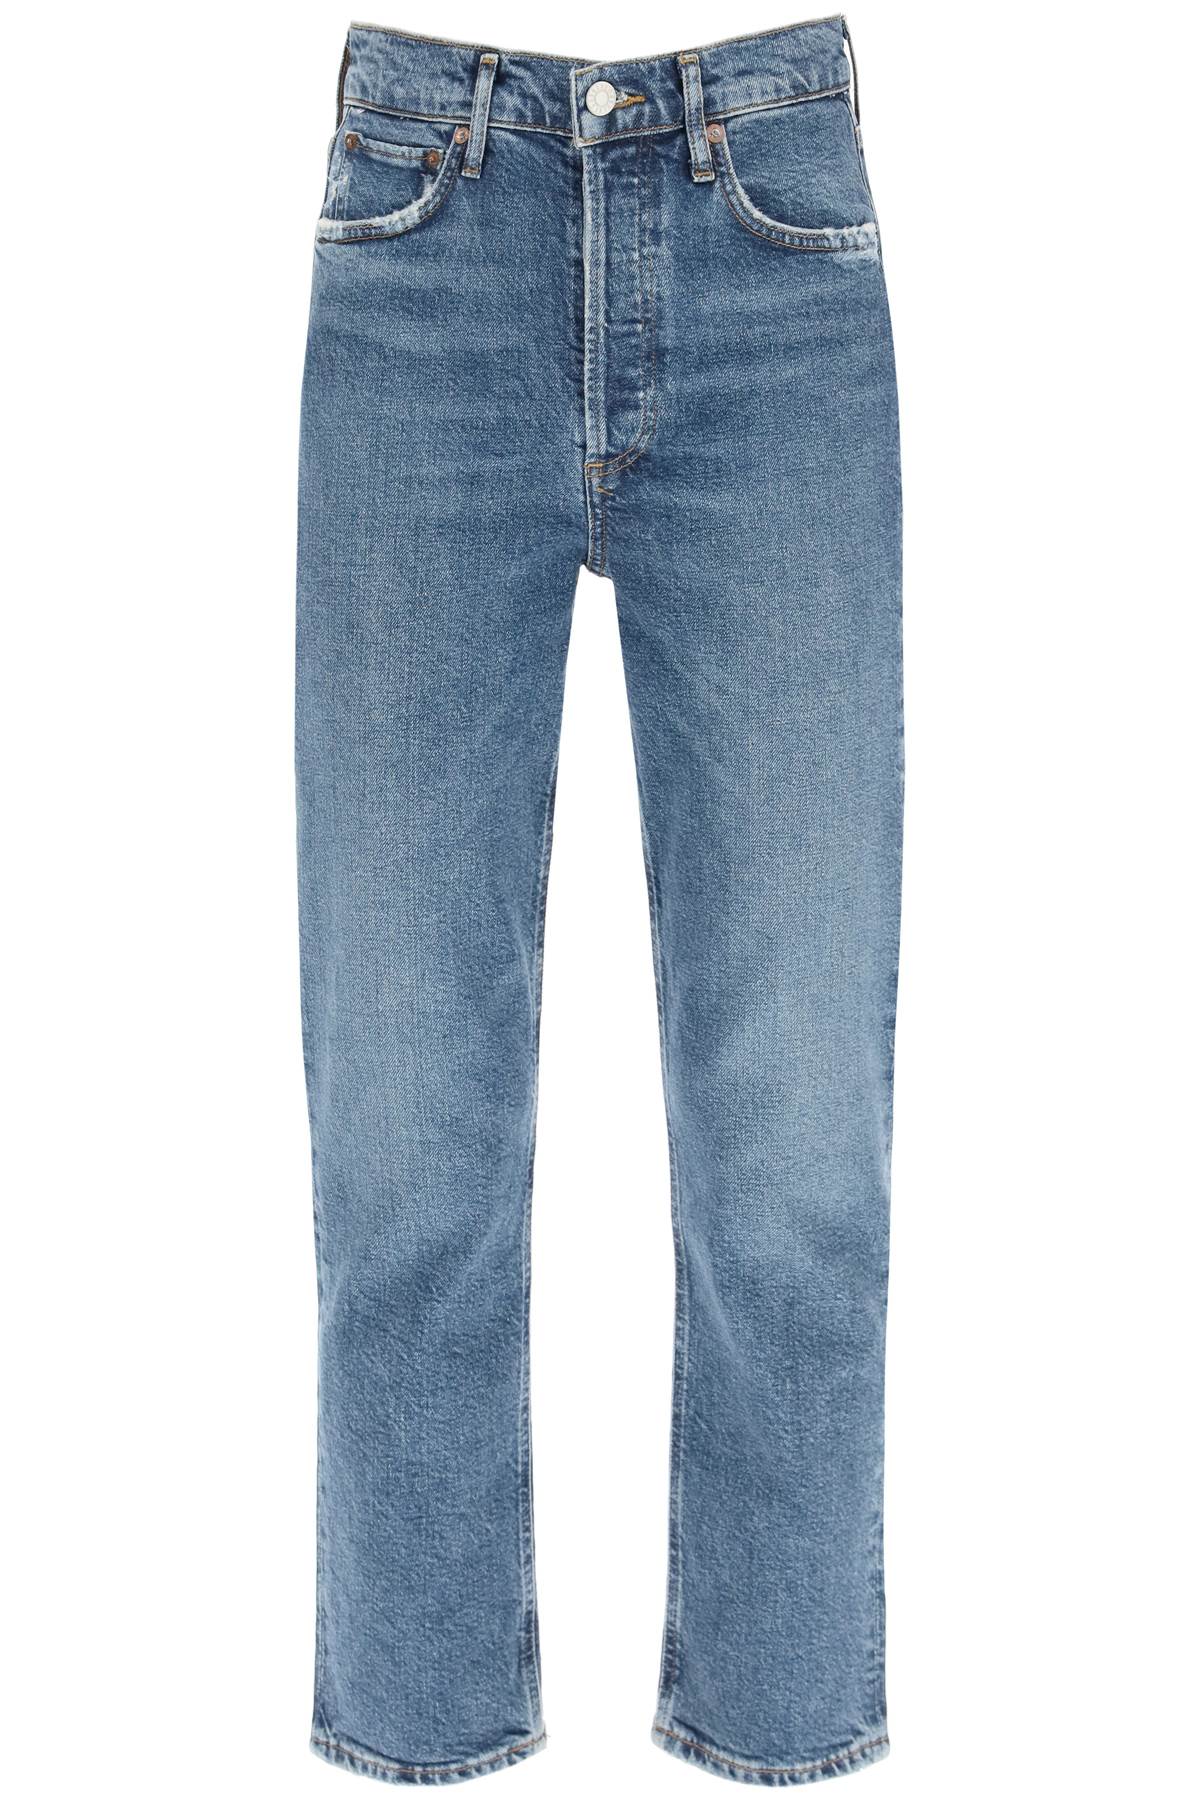 AGOLDE riley Cropped Jeans